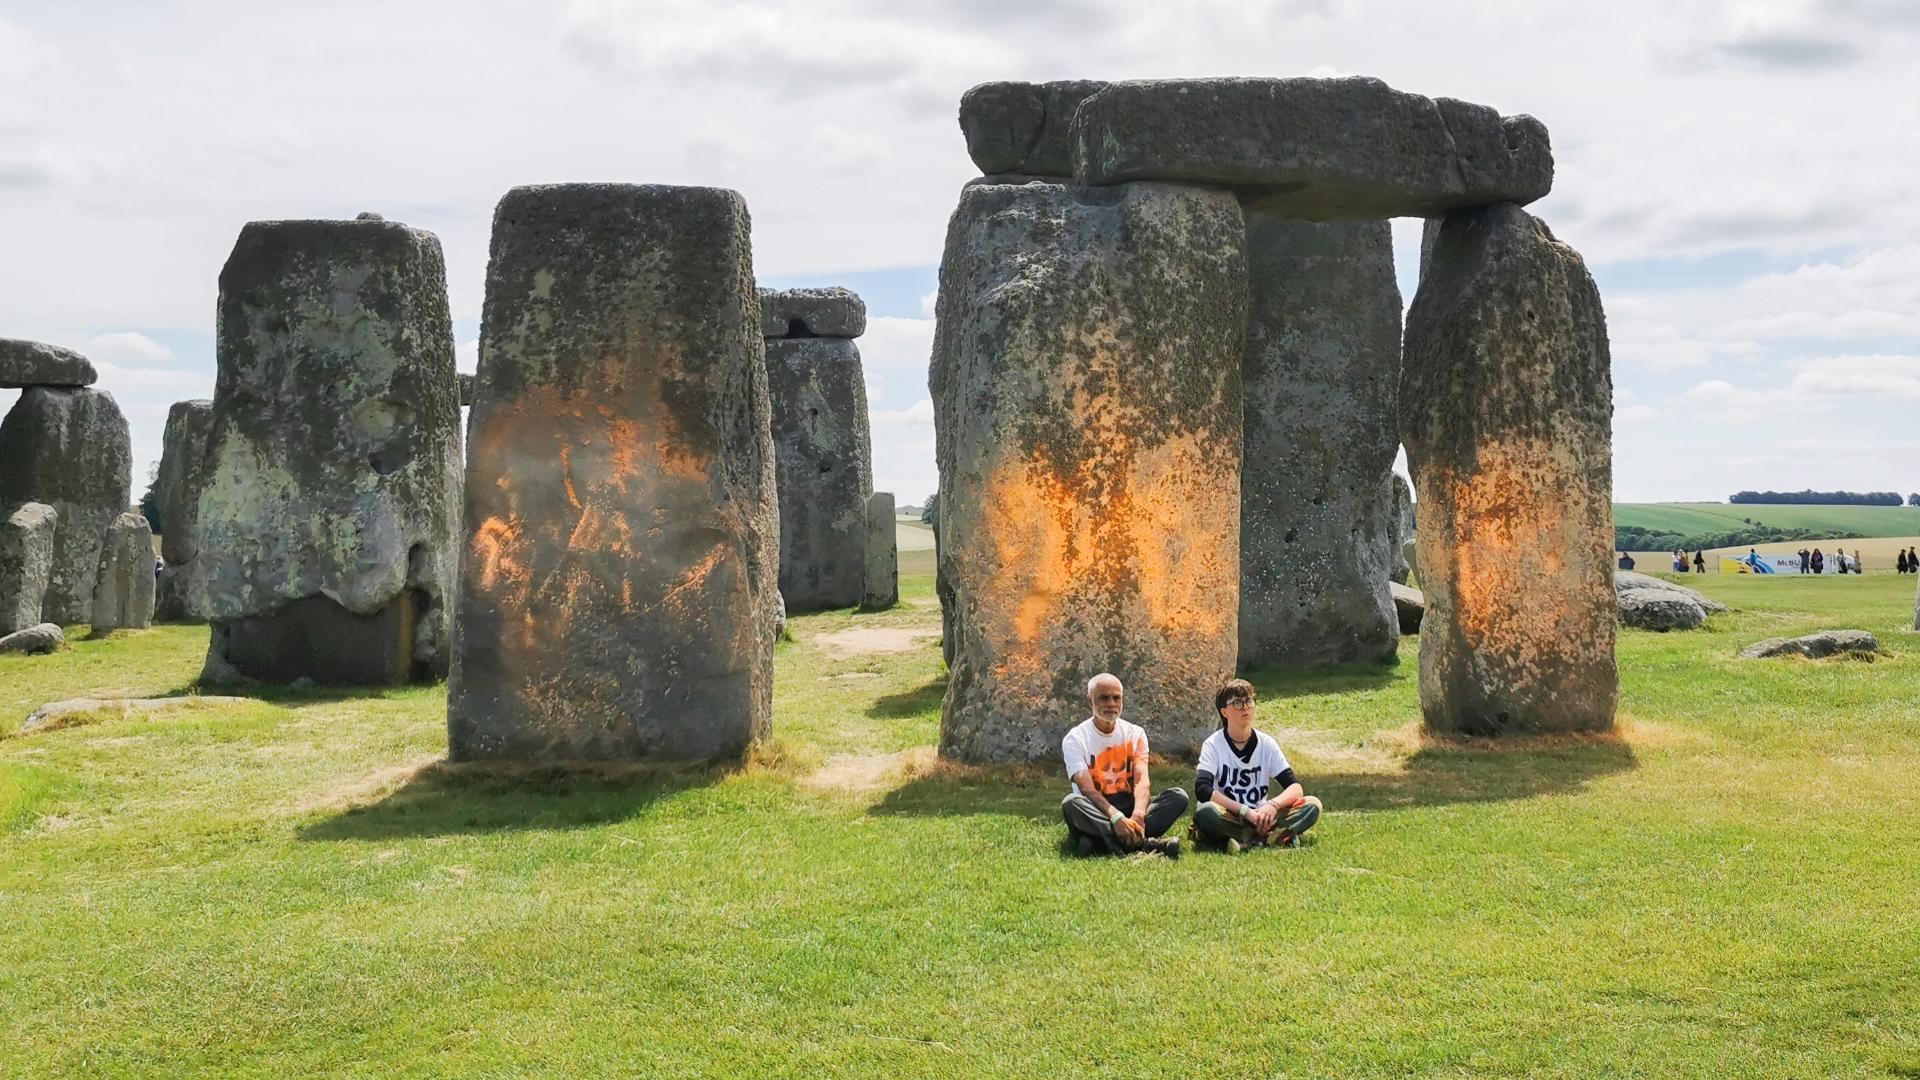 Two climate protesters were arrested on Wednesday after orange paint was sprayed on the ancient Stonehenge monument in southern England, police said.